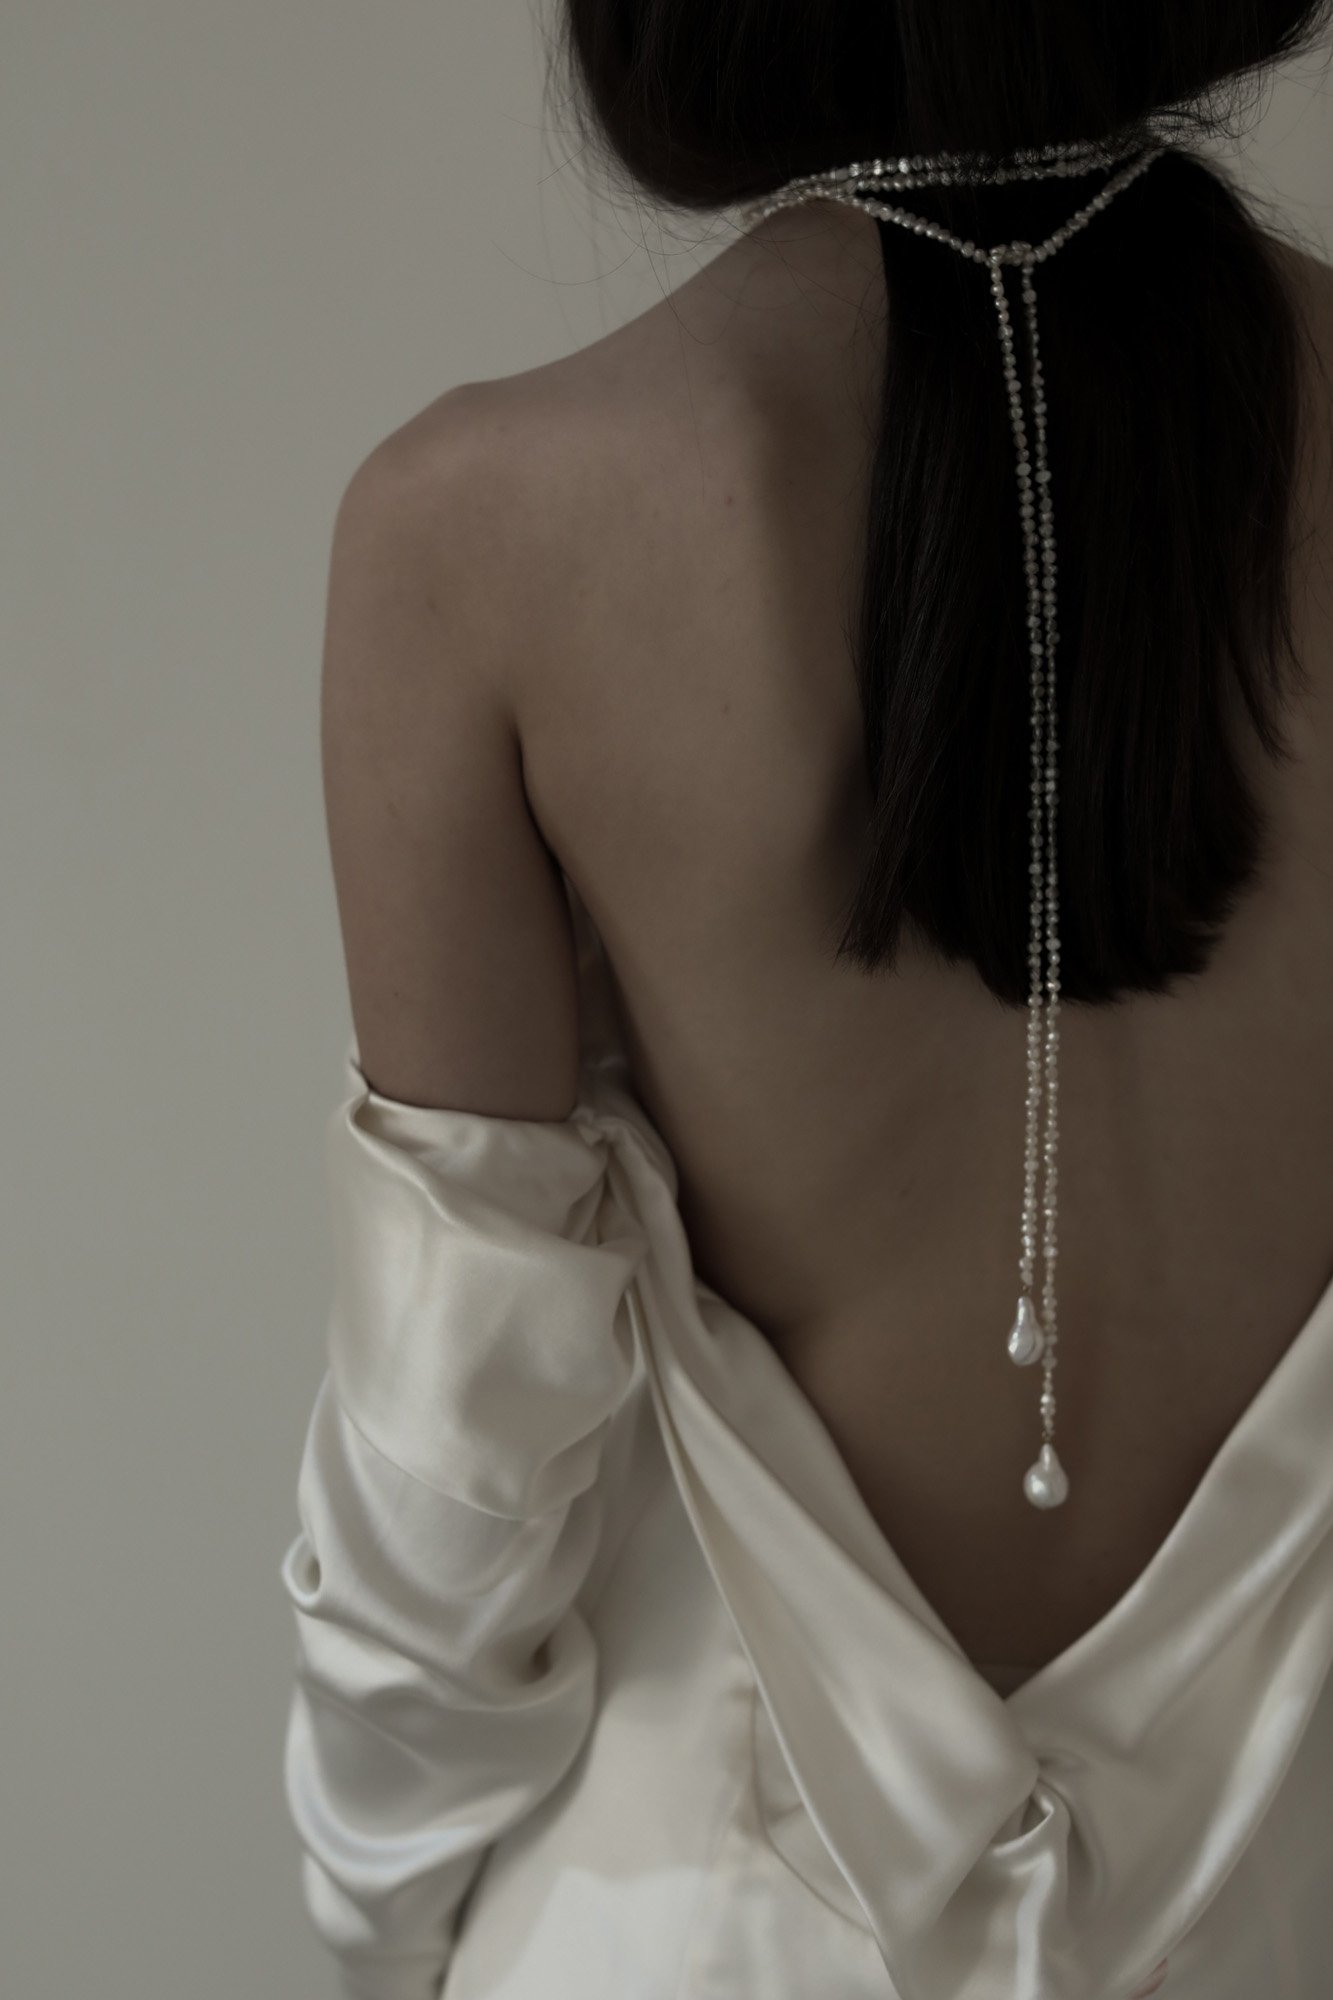 Bridal back necklace | Ora pearl necklace for low back dress – Cynthier